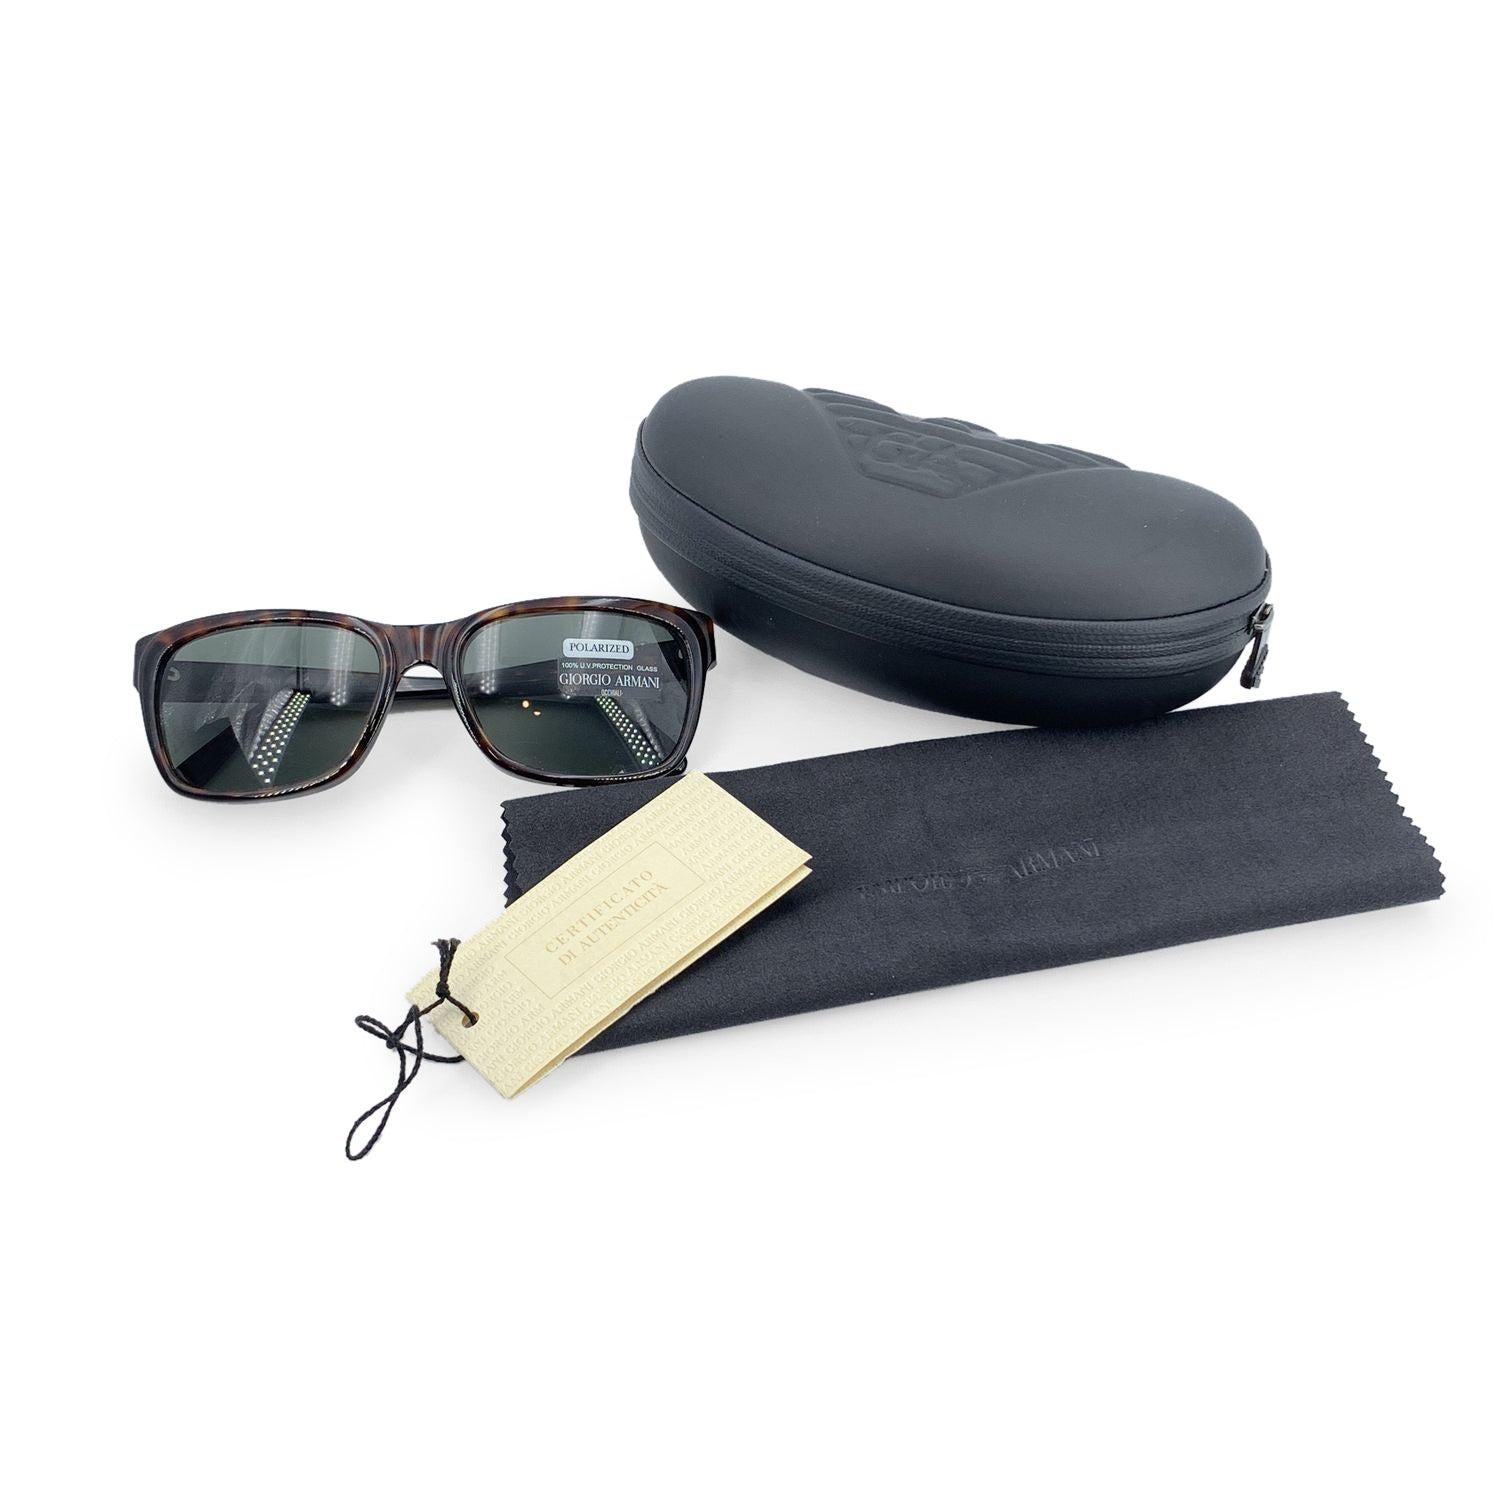 Vintage Giorgio Armani Sunglasses, Mod. 846 - 063/48 - LARGE - 140. Dark brown acetate rectangle shaped frame. Grey polarized glass lenses with 100% UV protection. Made in Italy. Details MATERIAL: Plastic COLOR: Brown MODEL: 846 GENDER: Unisex